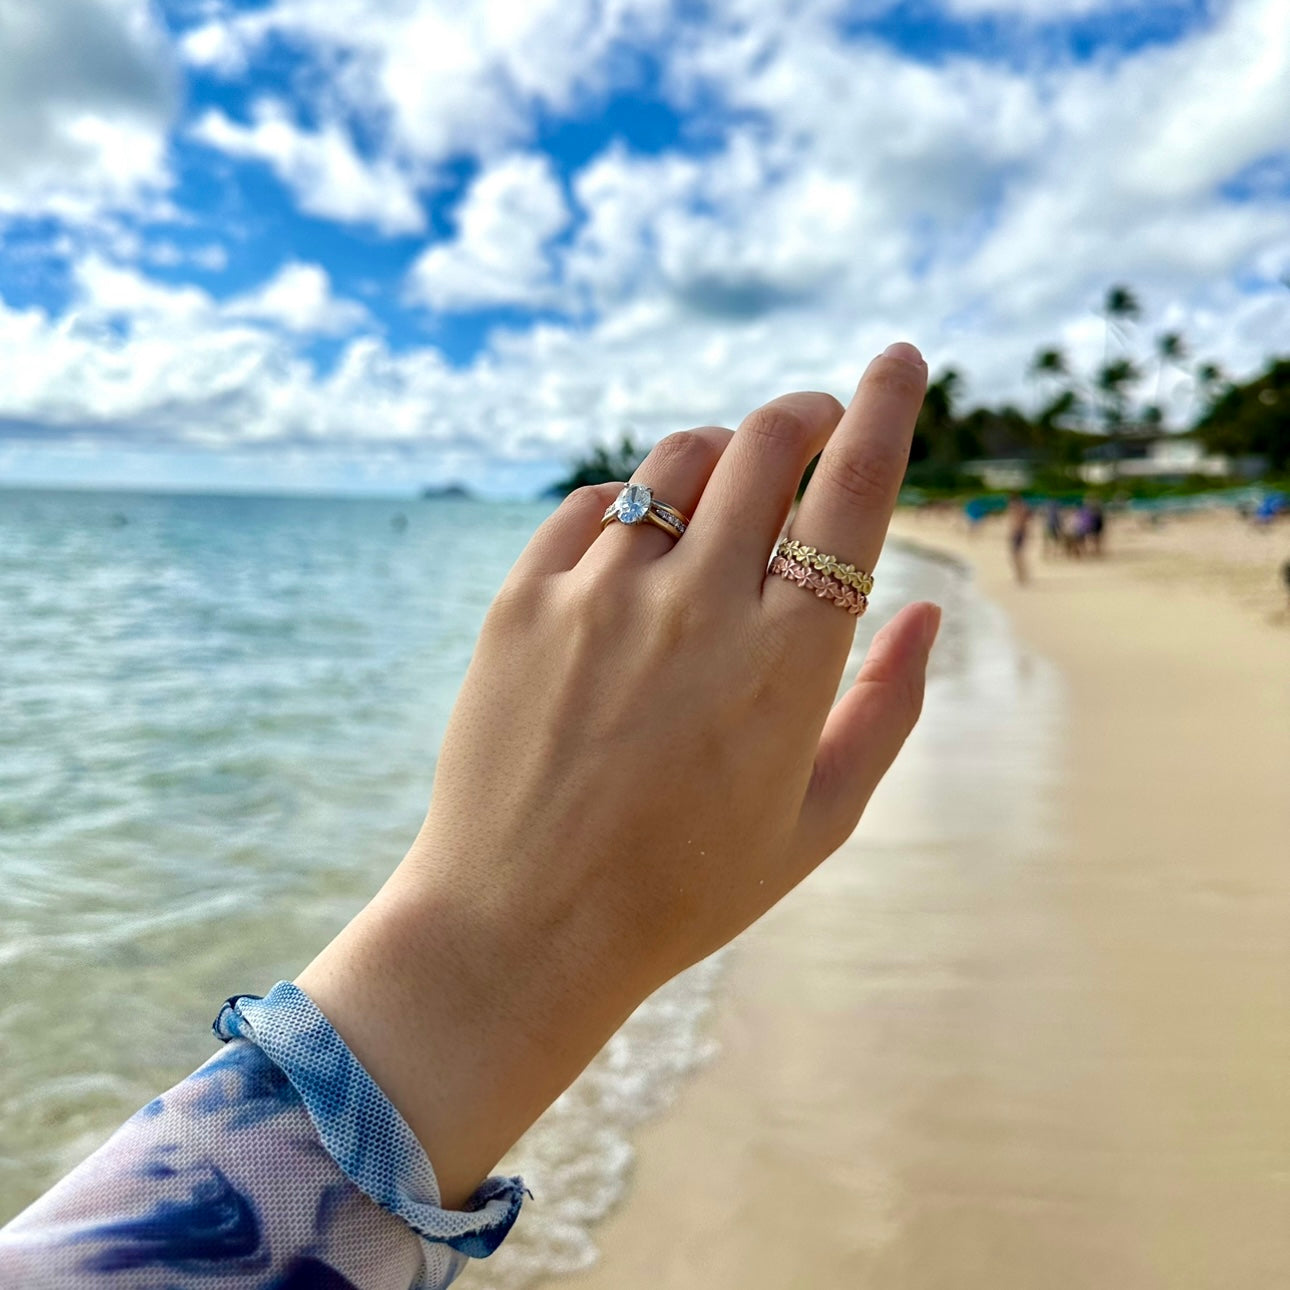 Should You Travel with Your Engagement Ring? And Where Shall You Not Wear It?